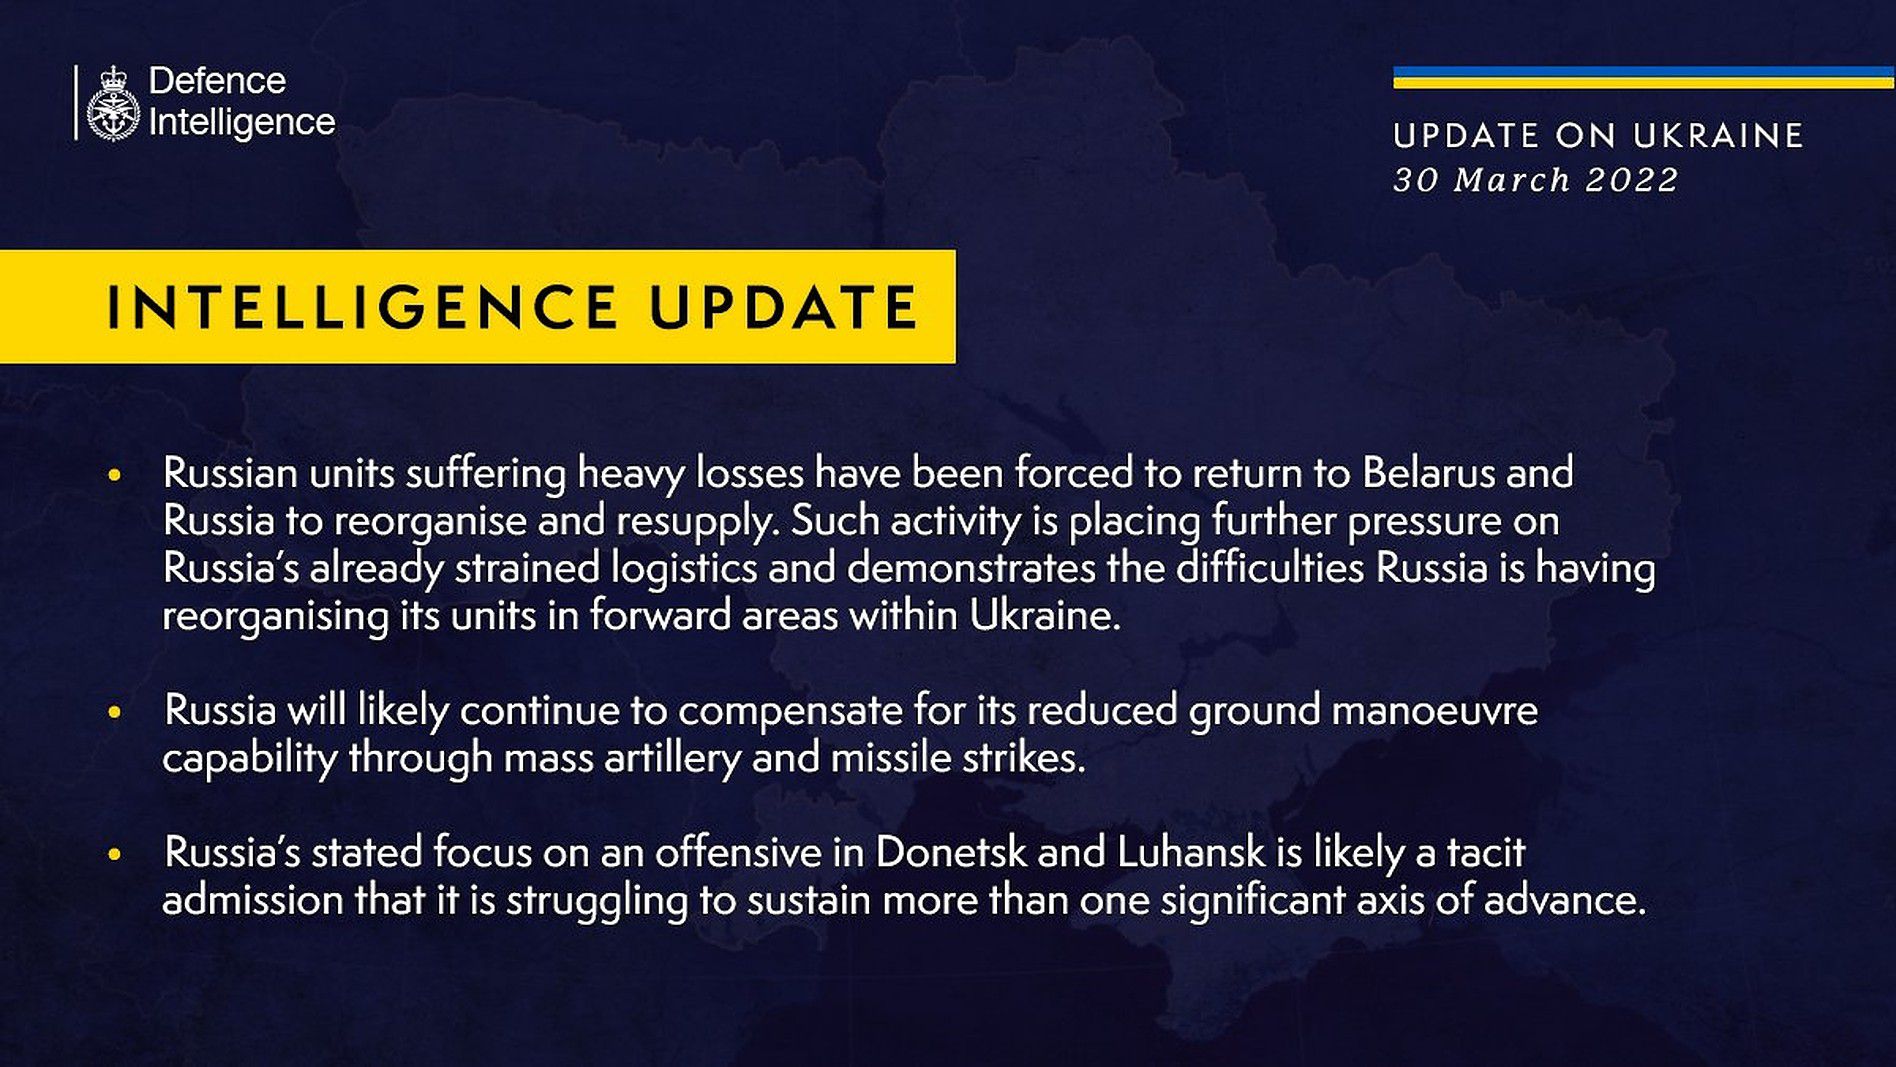 A screenshot of the UK intelligence update on Ukraine warning that Russian forces are regrouping in Belarus.